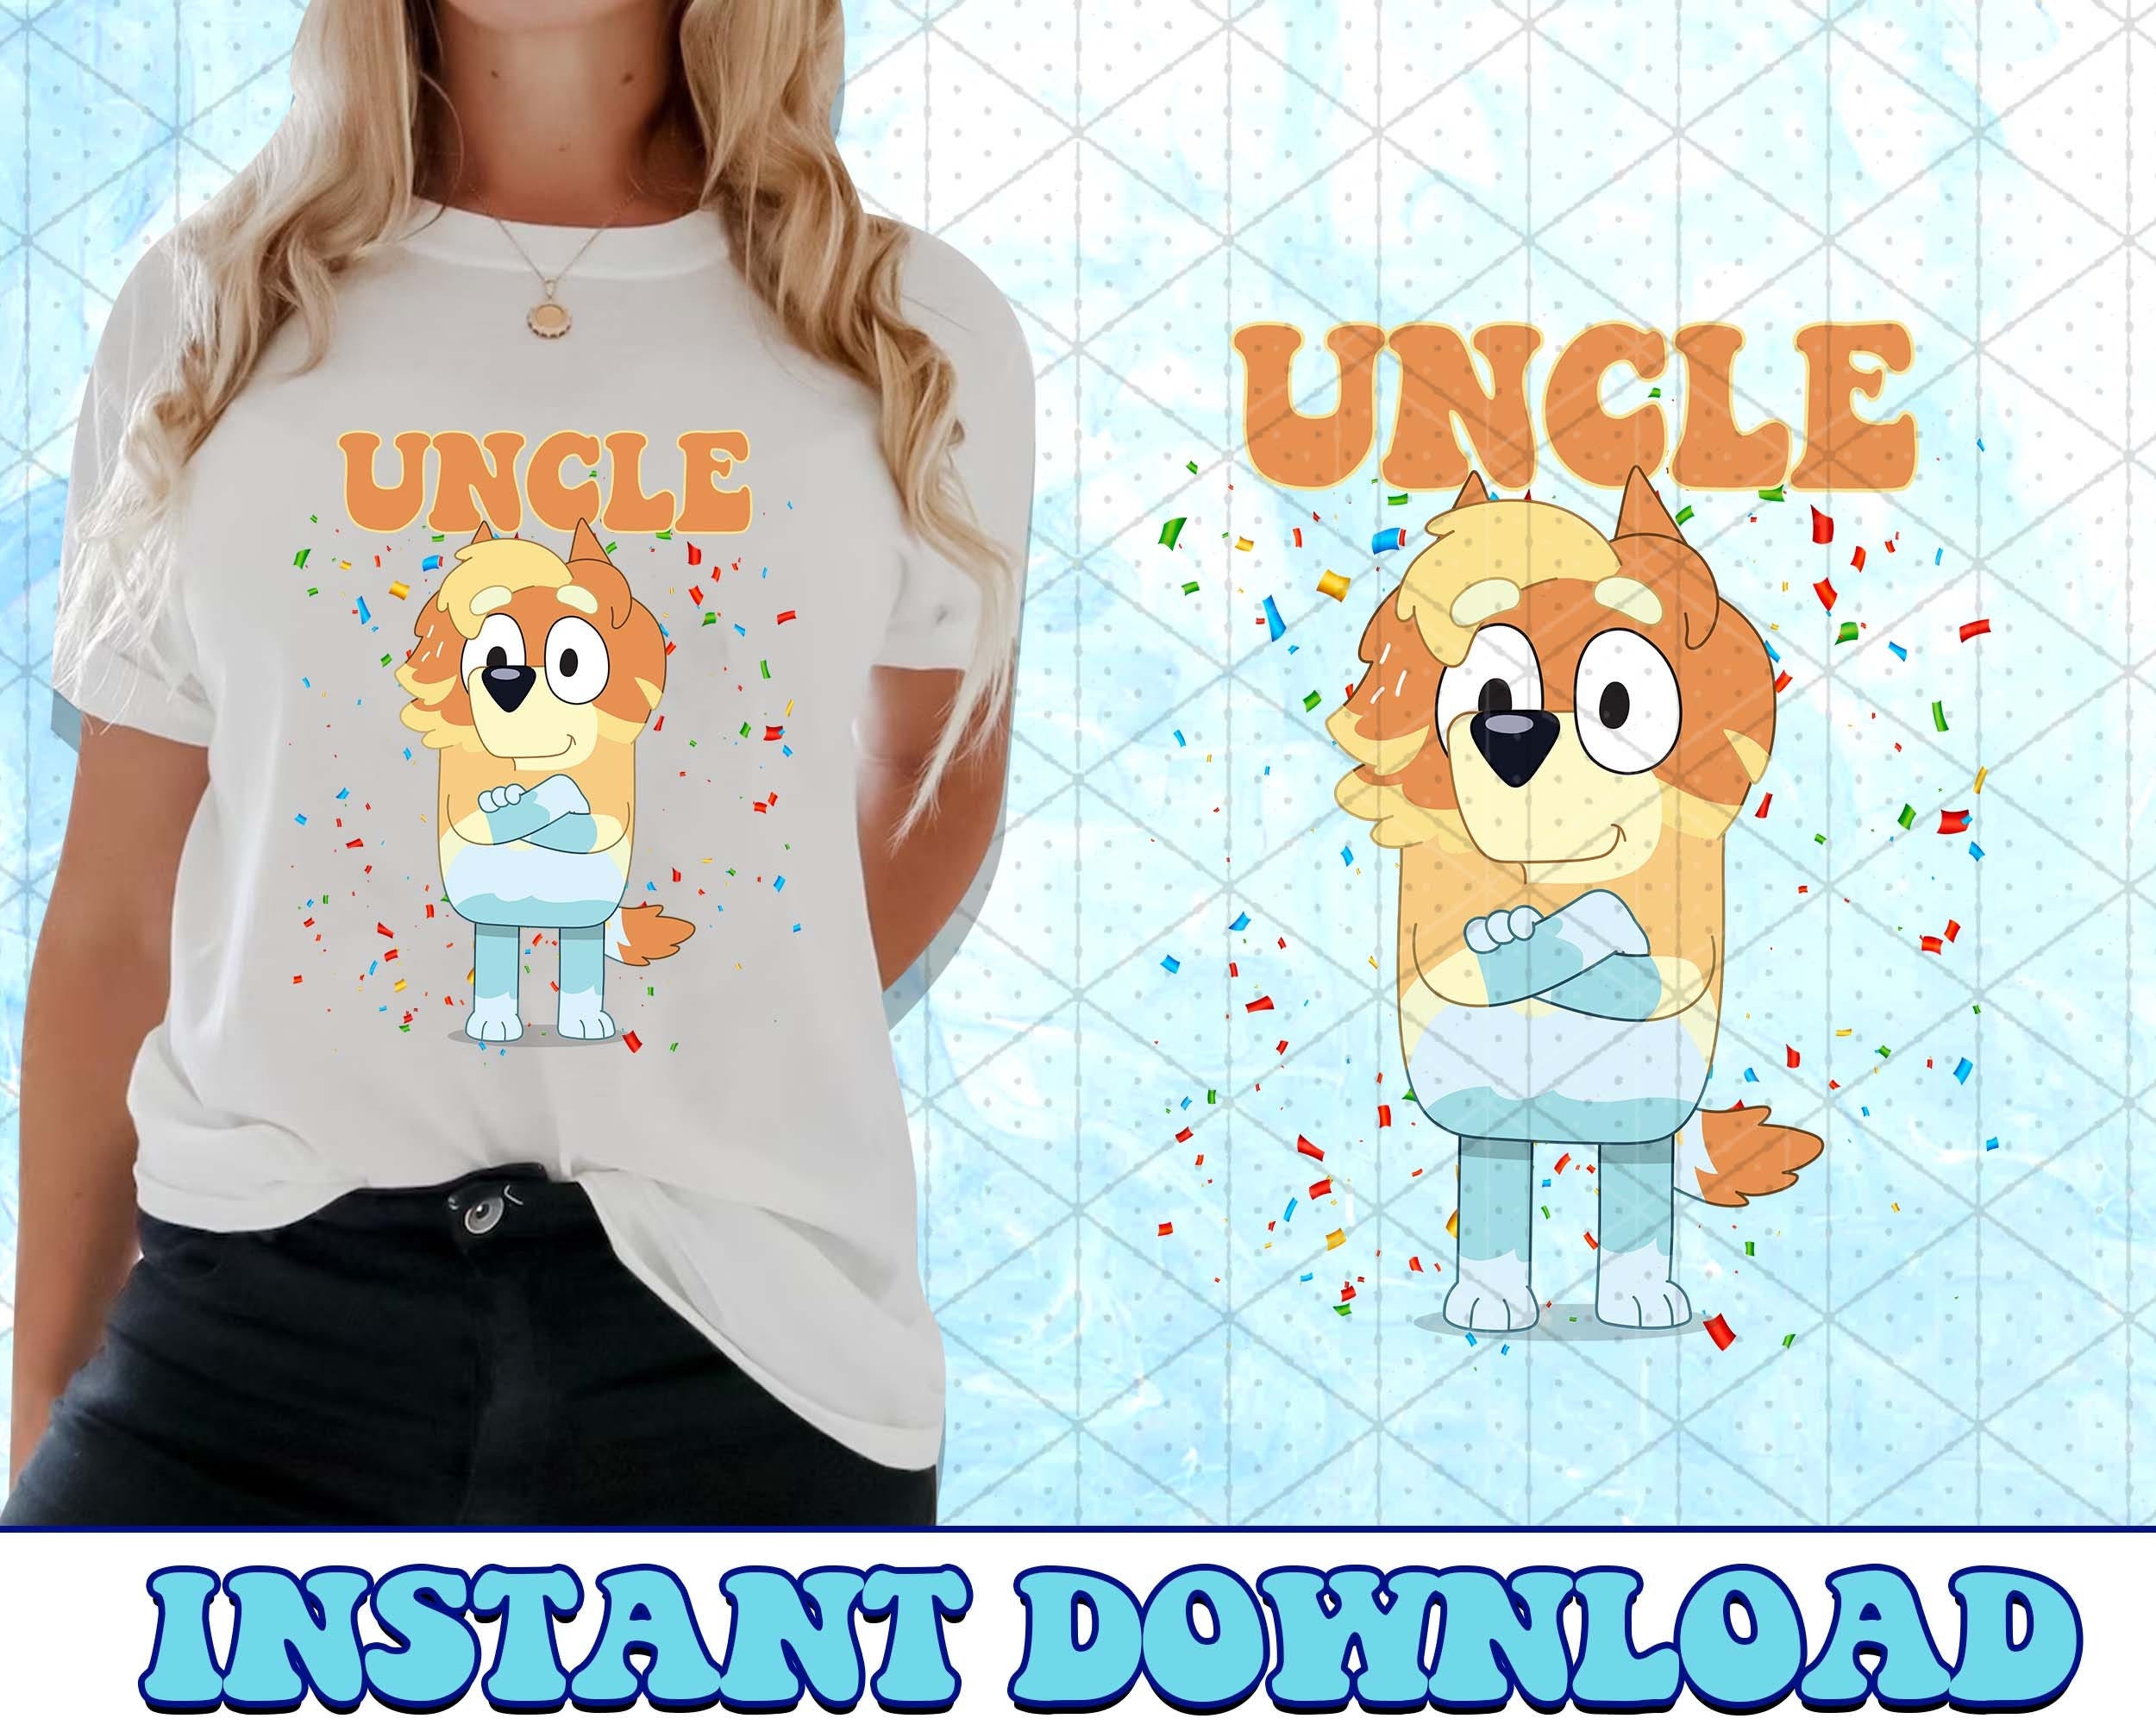 Uncle Bluey PNG, Bluey Family Birthday PNG, Bluey Birthday Png, Bluey Bingo Png, Bluey Mom Png, Bluey Dad Png, Bluey Friends Png, Bluey PNG